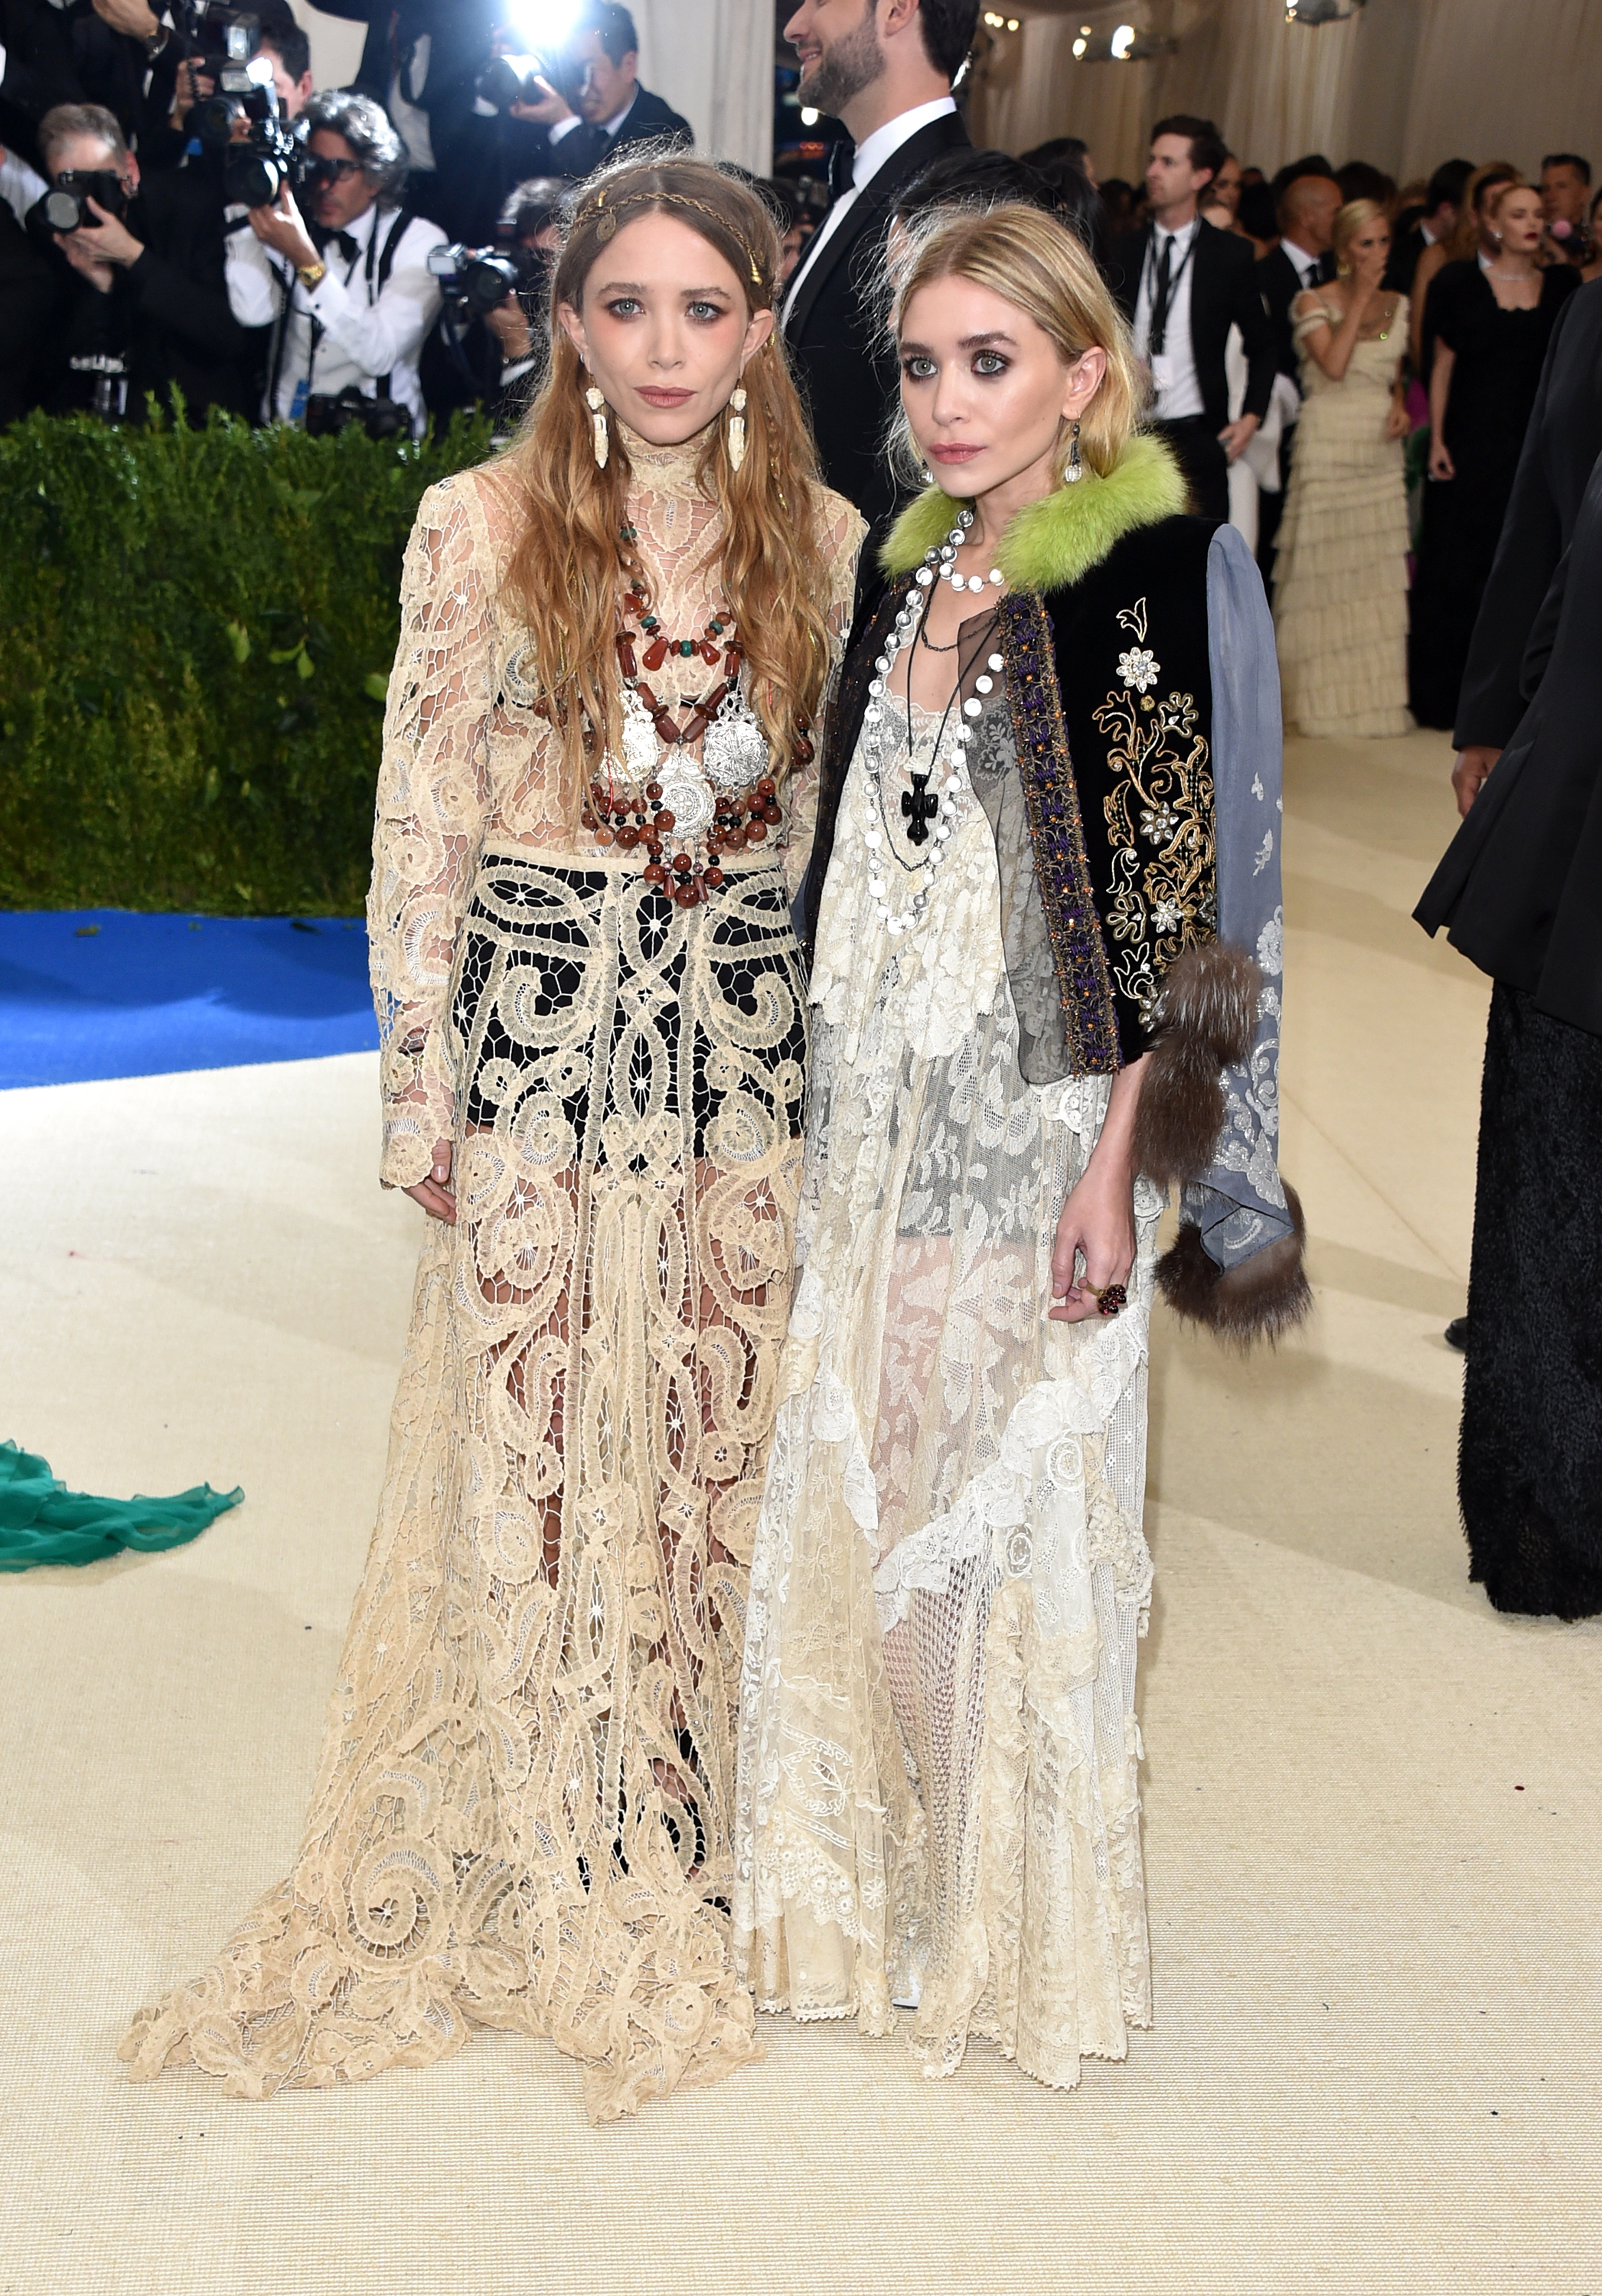 Mary Kate and Ashley Olsen at the Met Gala 2017